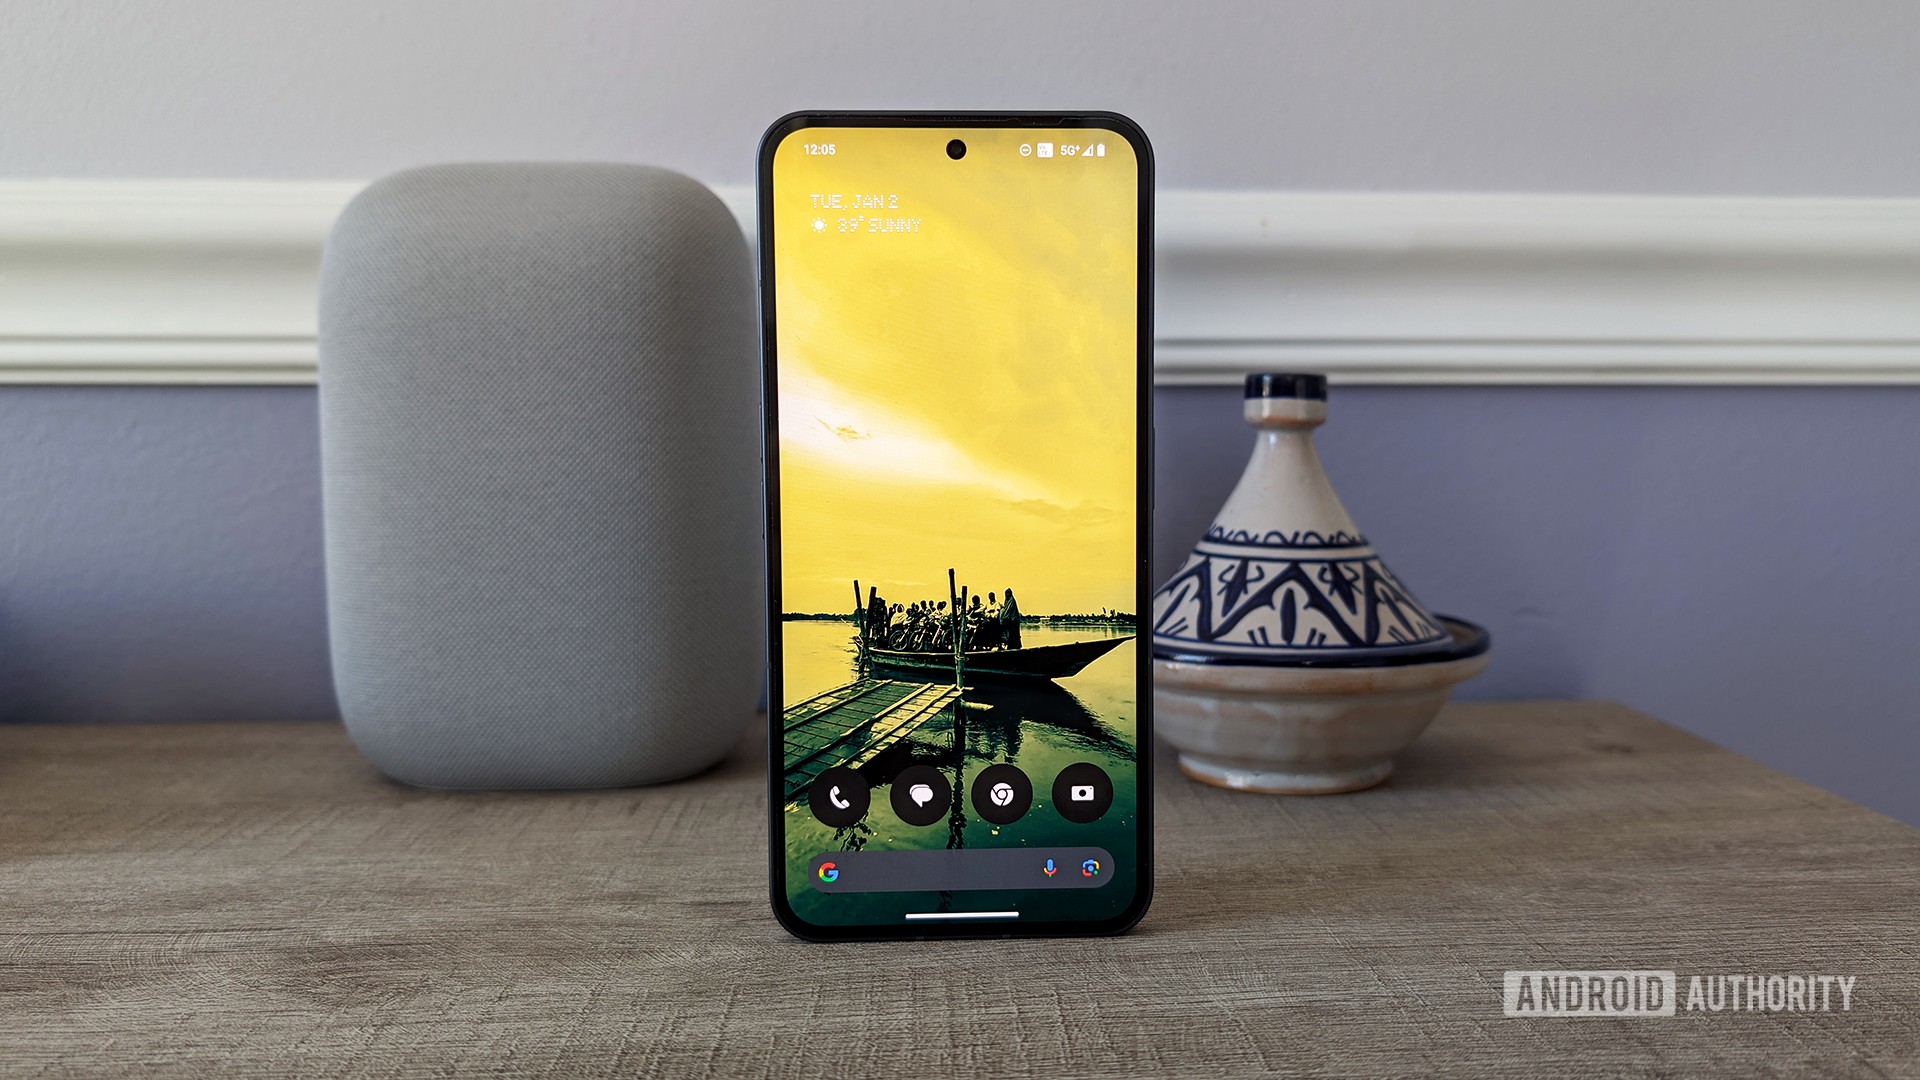 Wallpaper Wednesday: Android wallpapers 2024-01-03